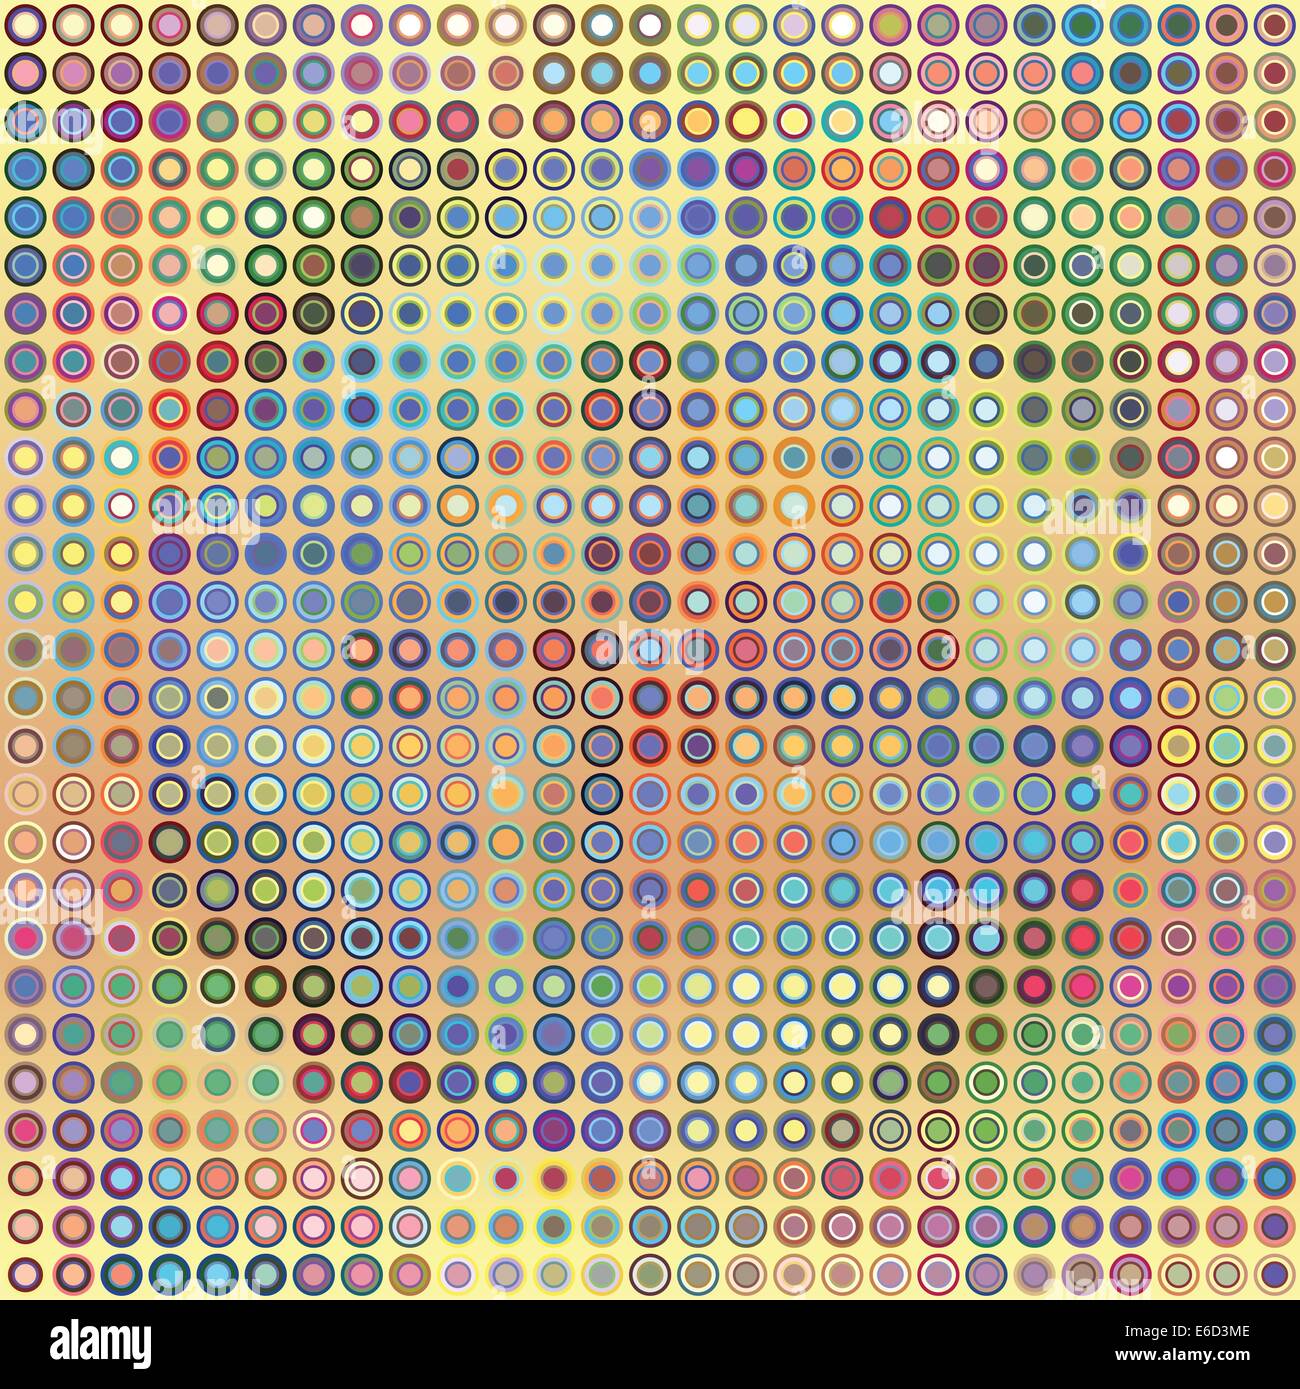 Abstract vector background illustration of multicolored dots Stock Vector